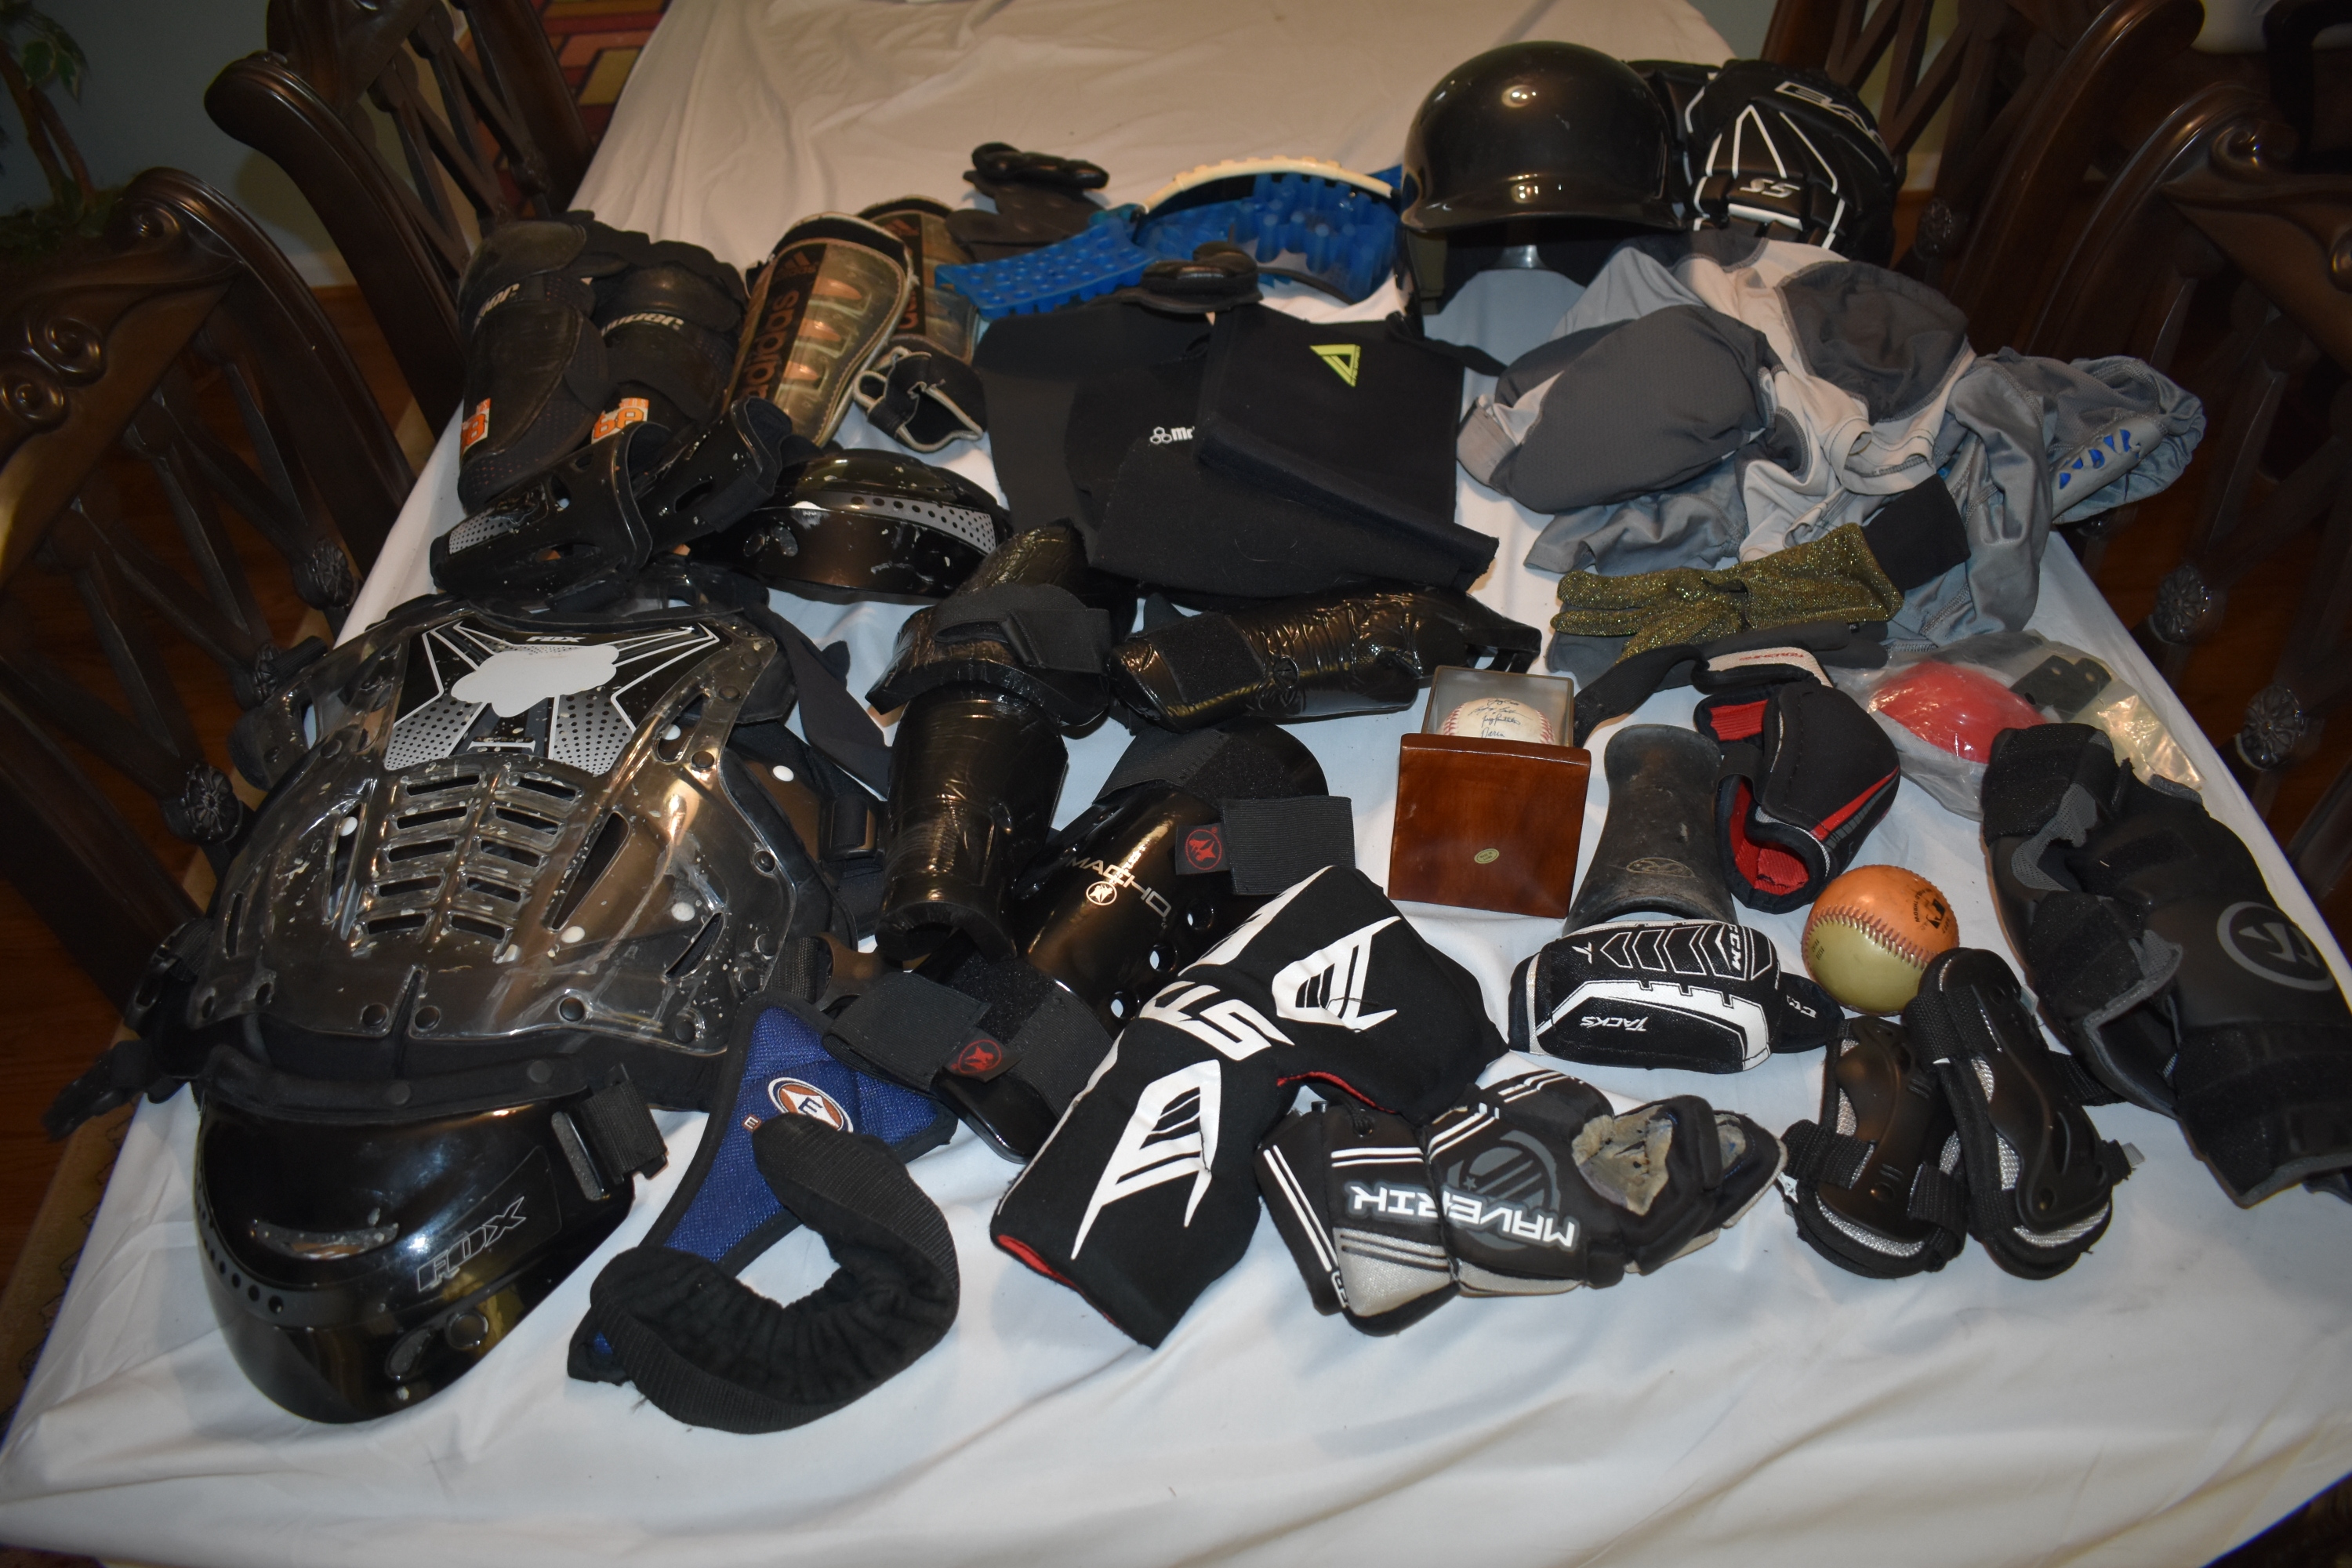 Large lot of mixed sports items